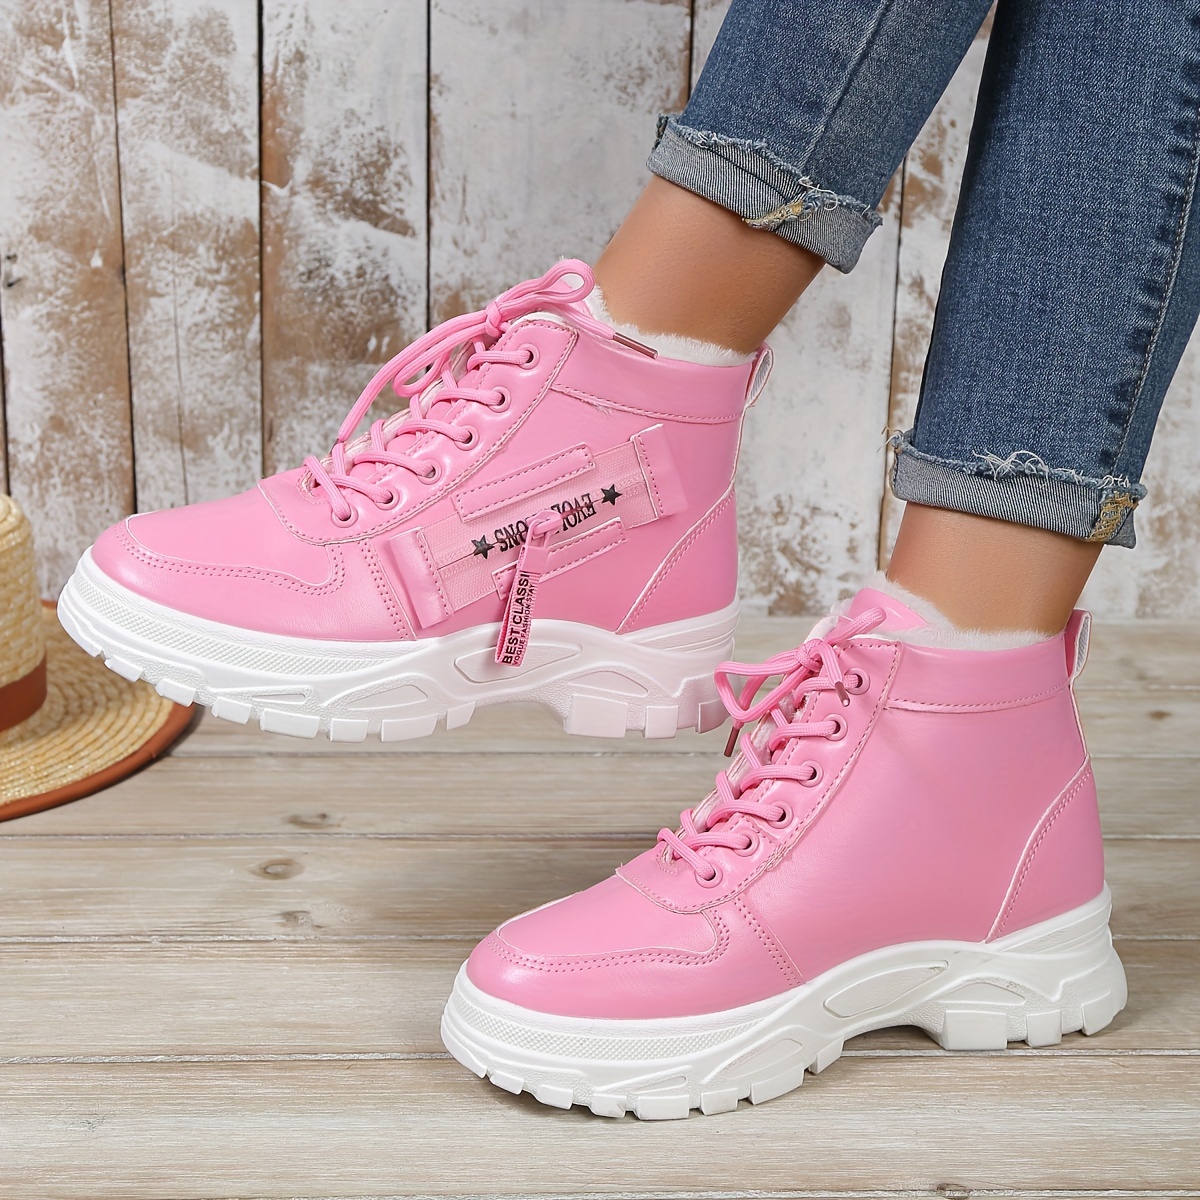 womens winter high top sneakers casual lace up plush lined boots comfortable side zipper short boots details 2